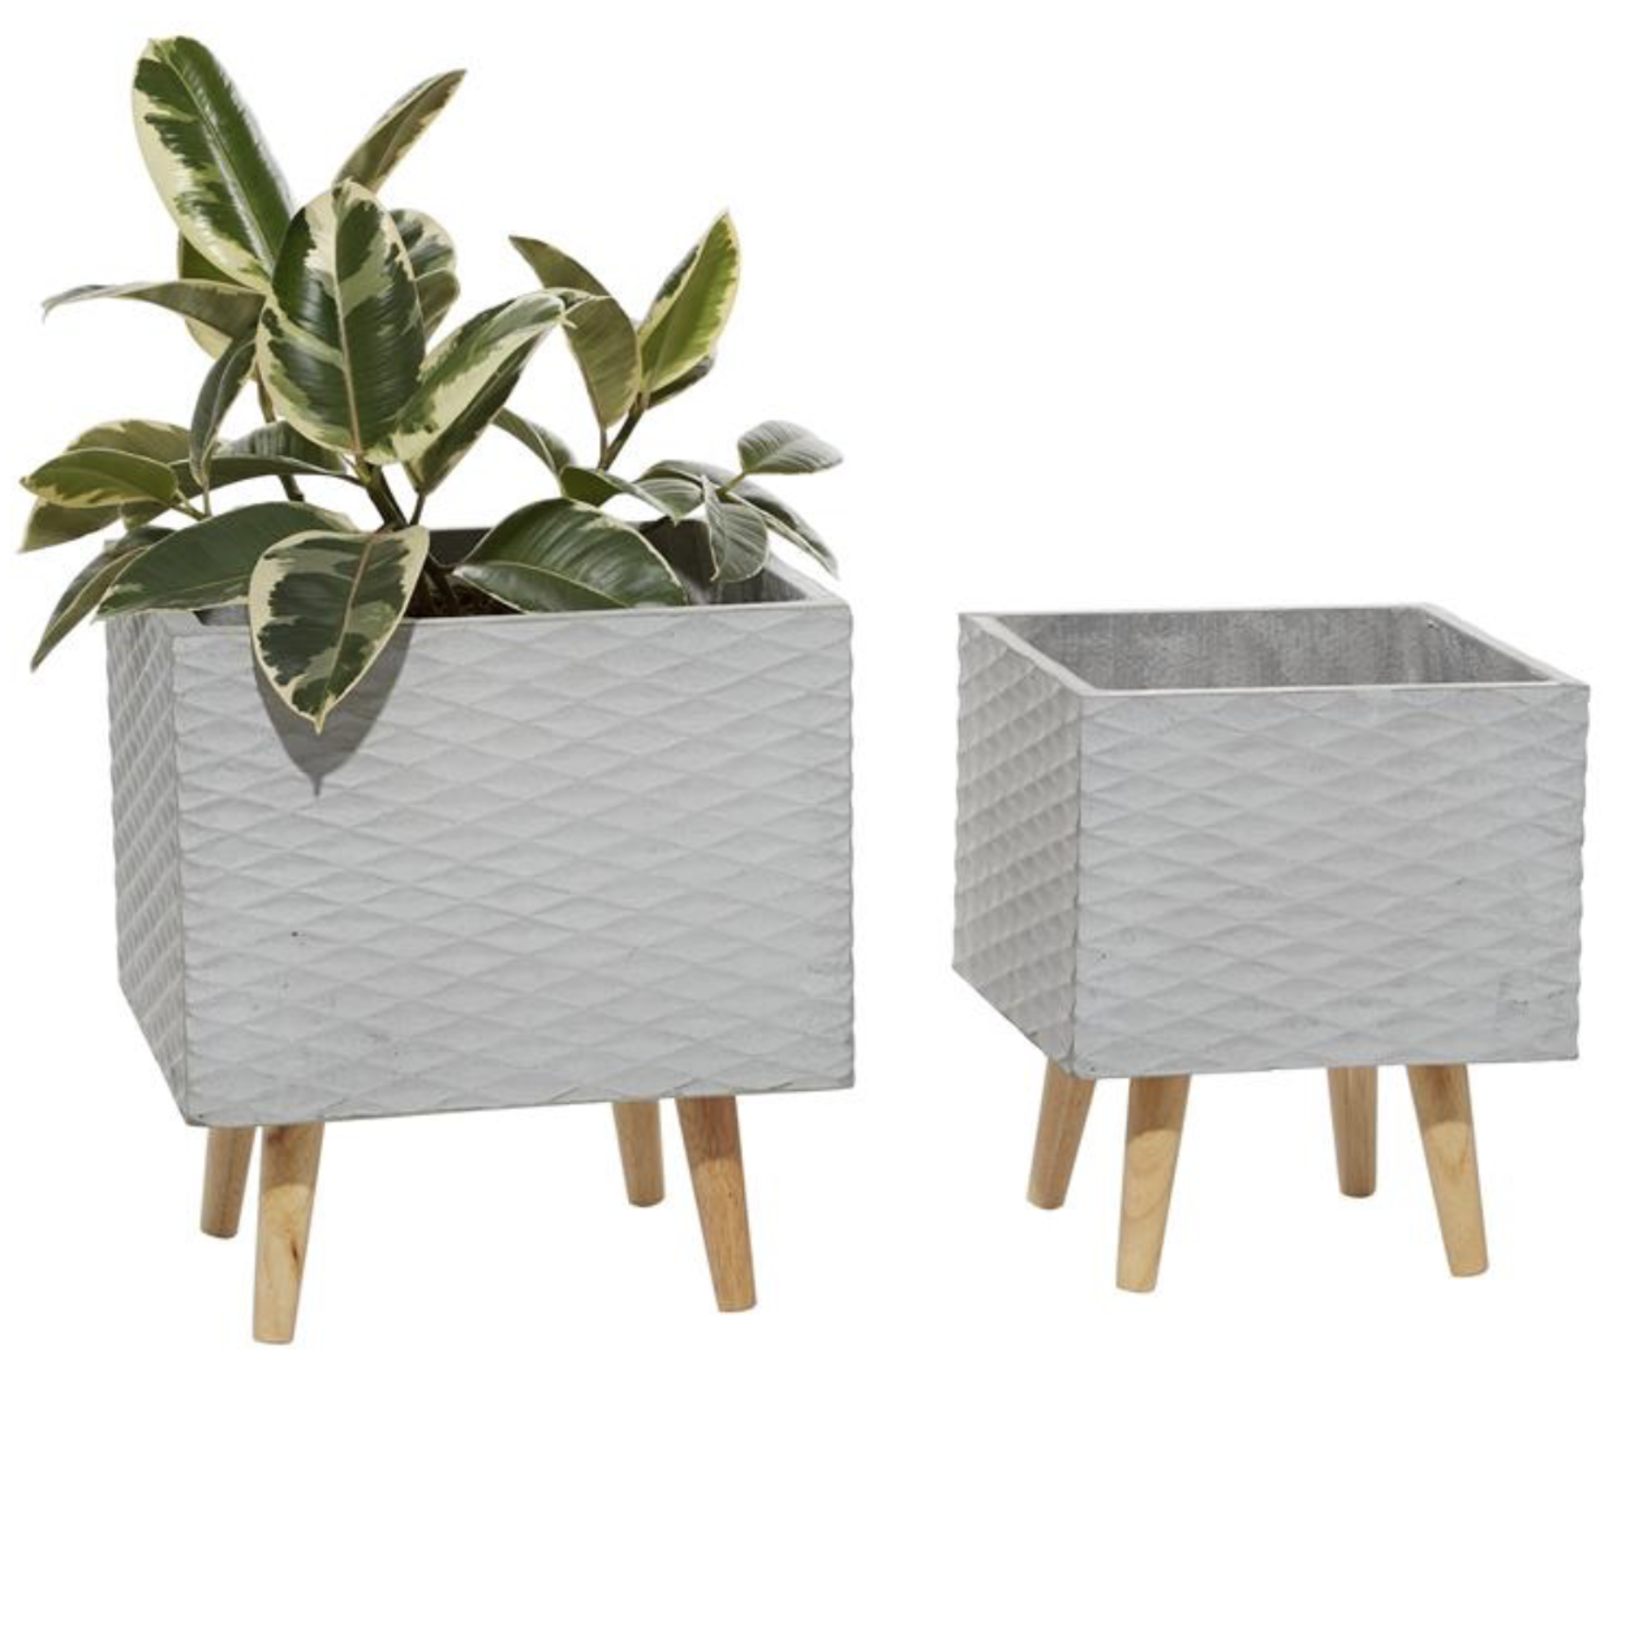 15”H X 14” X 14” LARGE SQUARE GREY CERAMIC CONTEMPORARY PLANTER WITH WOOD STAND (NOT WATER TIGHT)